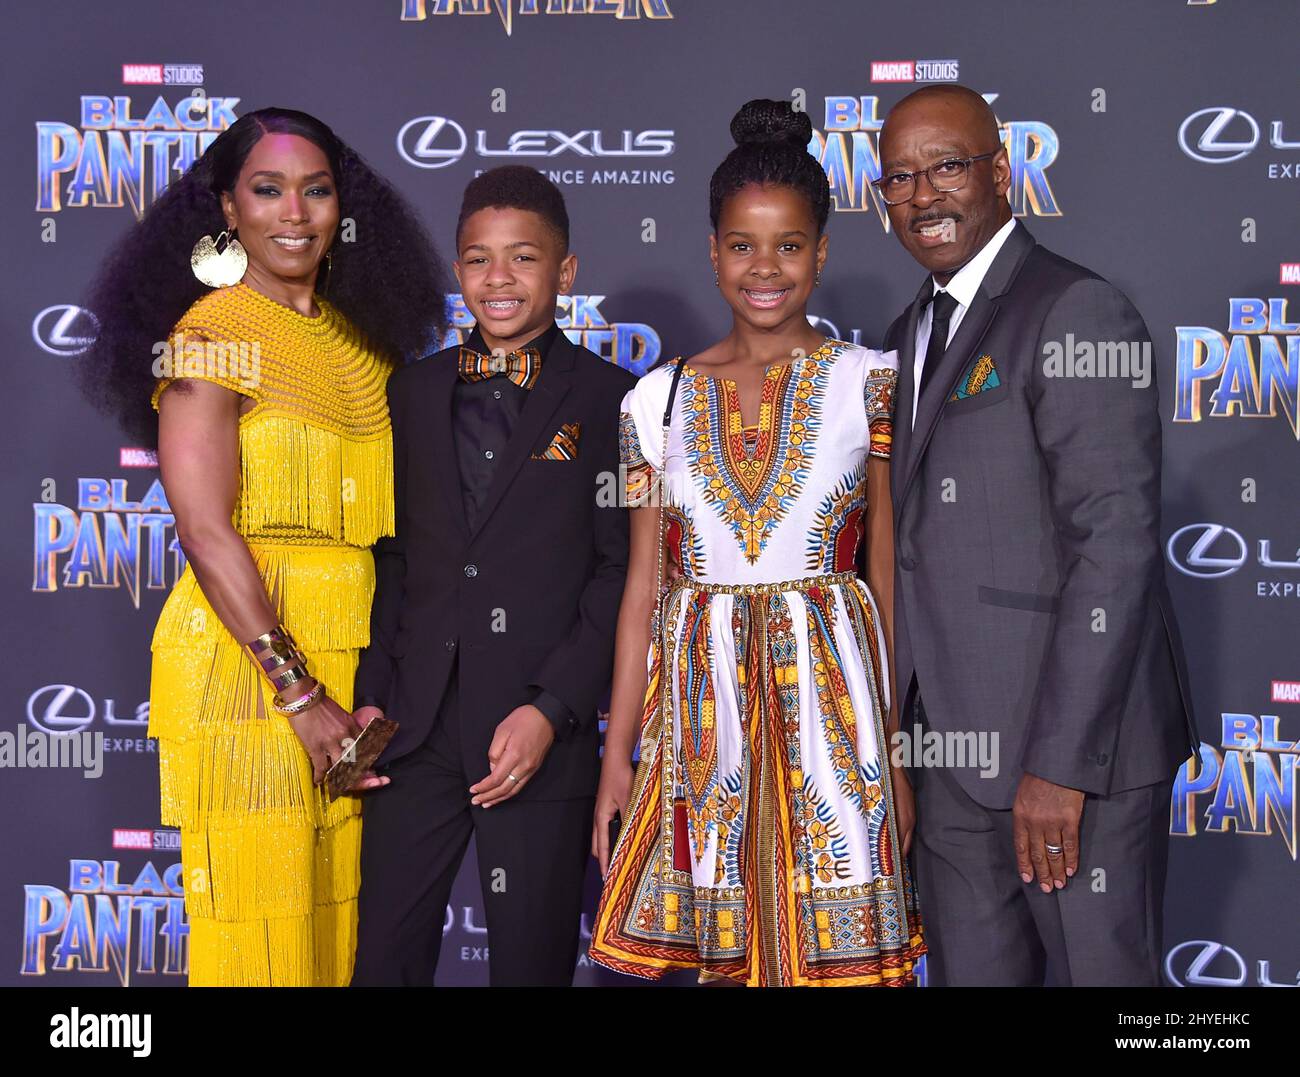 Angela Bassett, Bronwyn Vance, Slater Vance and Courtney B. Vance at the 'Black Panther' premiere held at the Dolby Theatre on January 29, 2018 in Hollywood, USA. Stock Photo